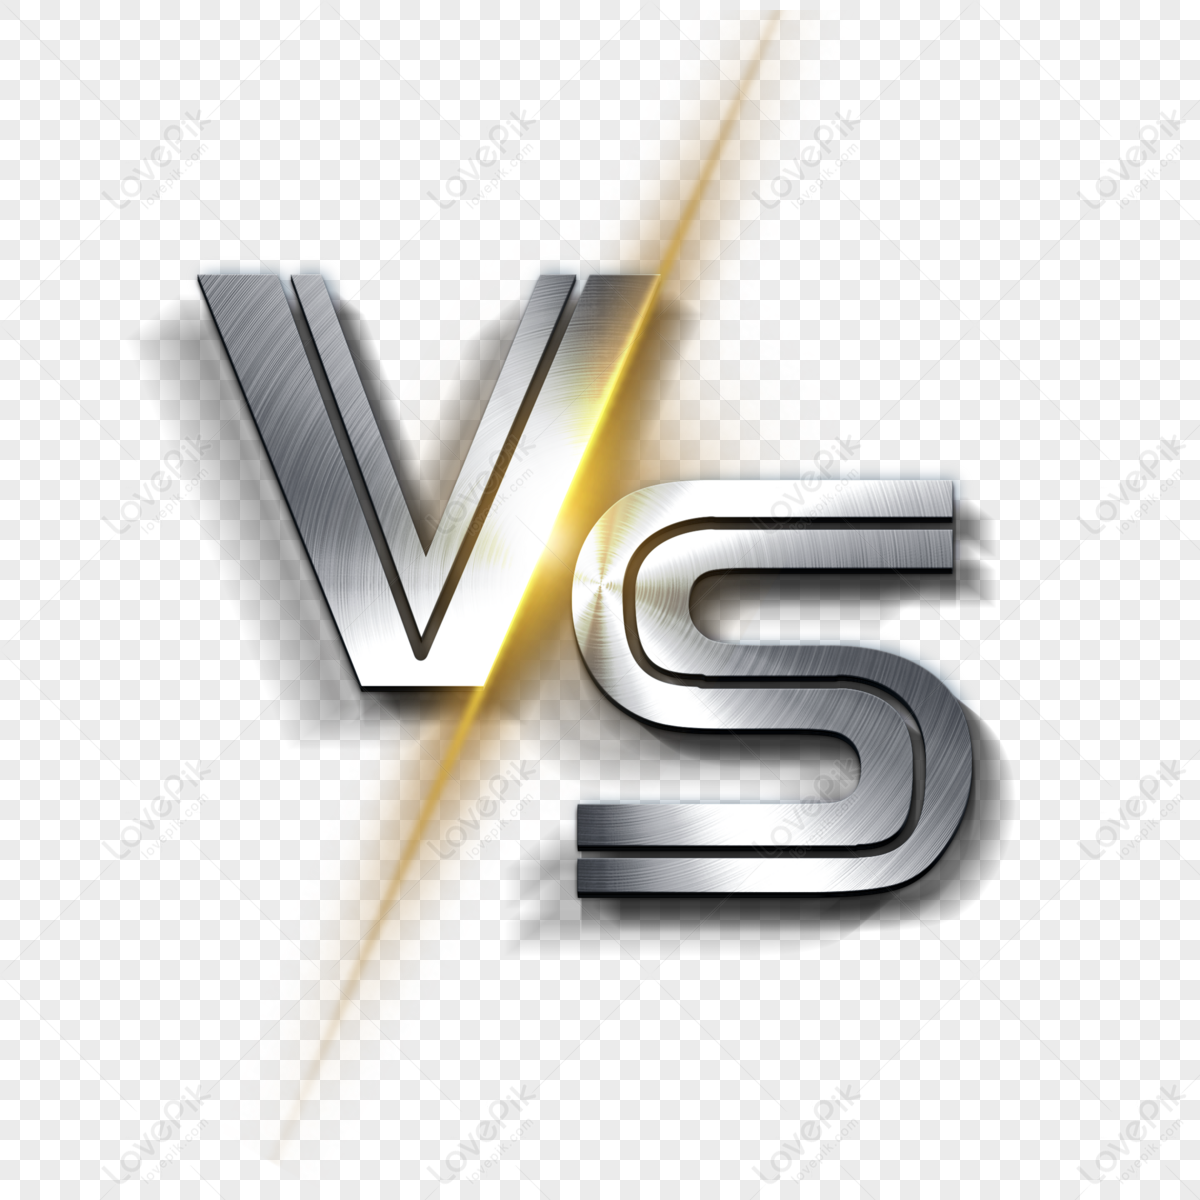 Premium Vector | Vs versus icon logo black white symbol fight competition  battle sport game grunge drawing and paint